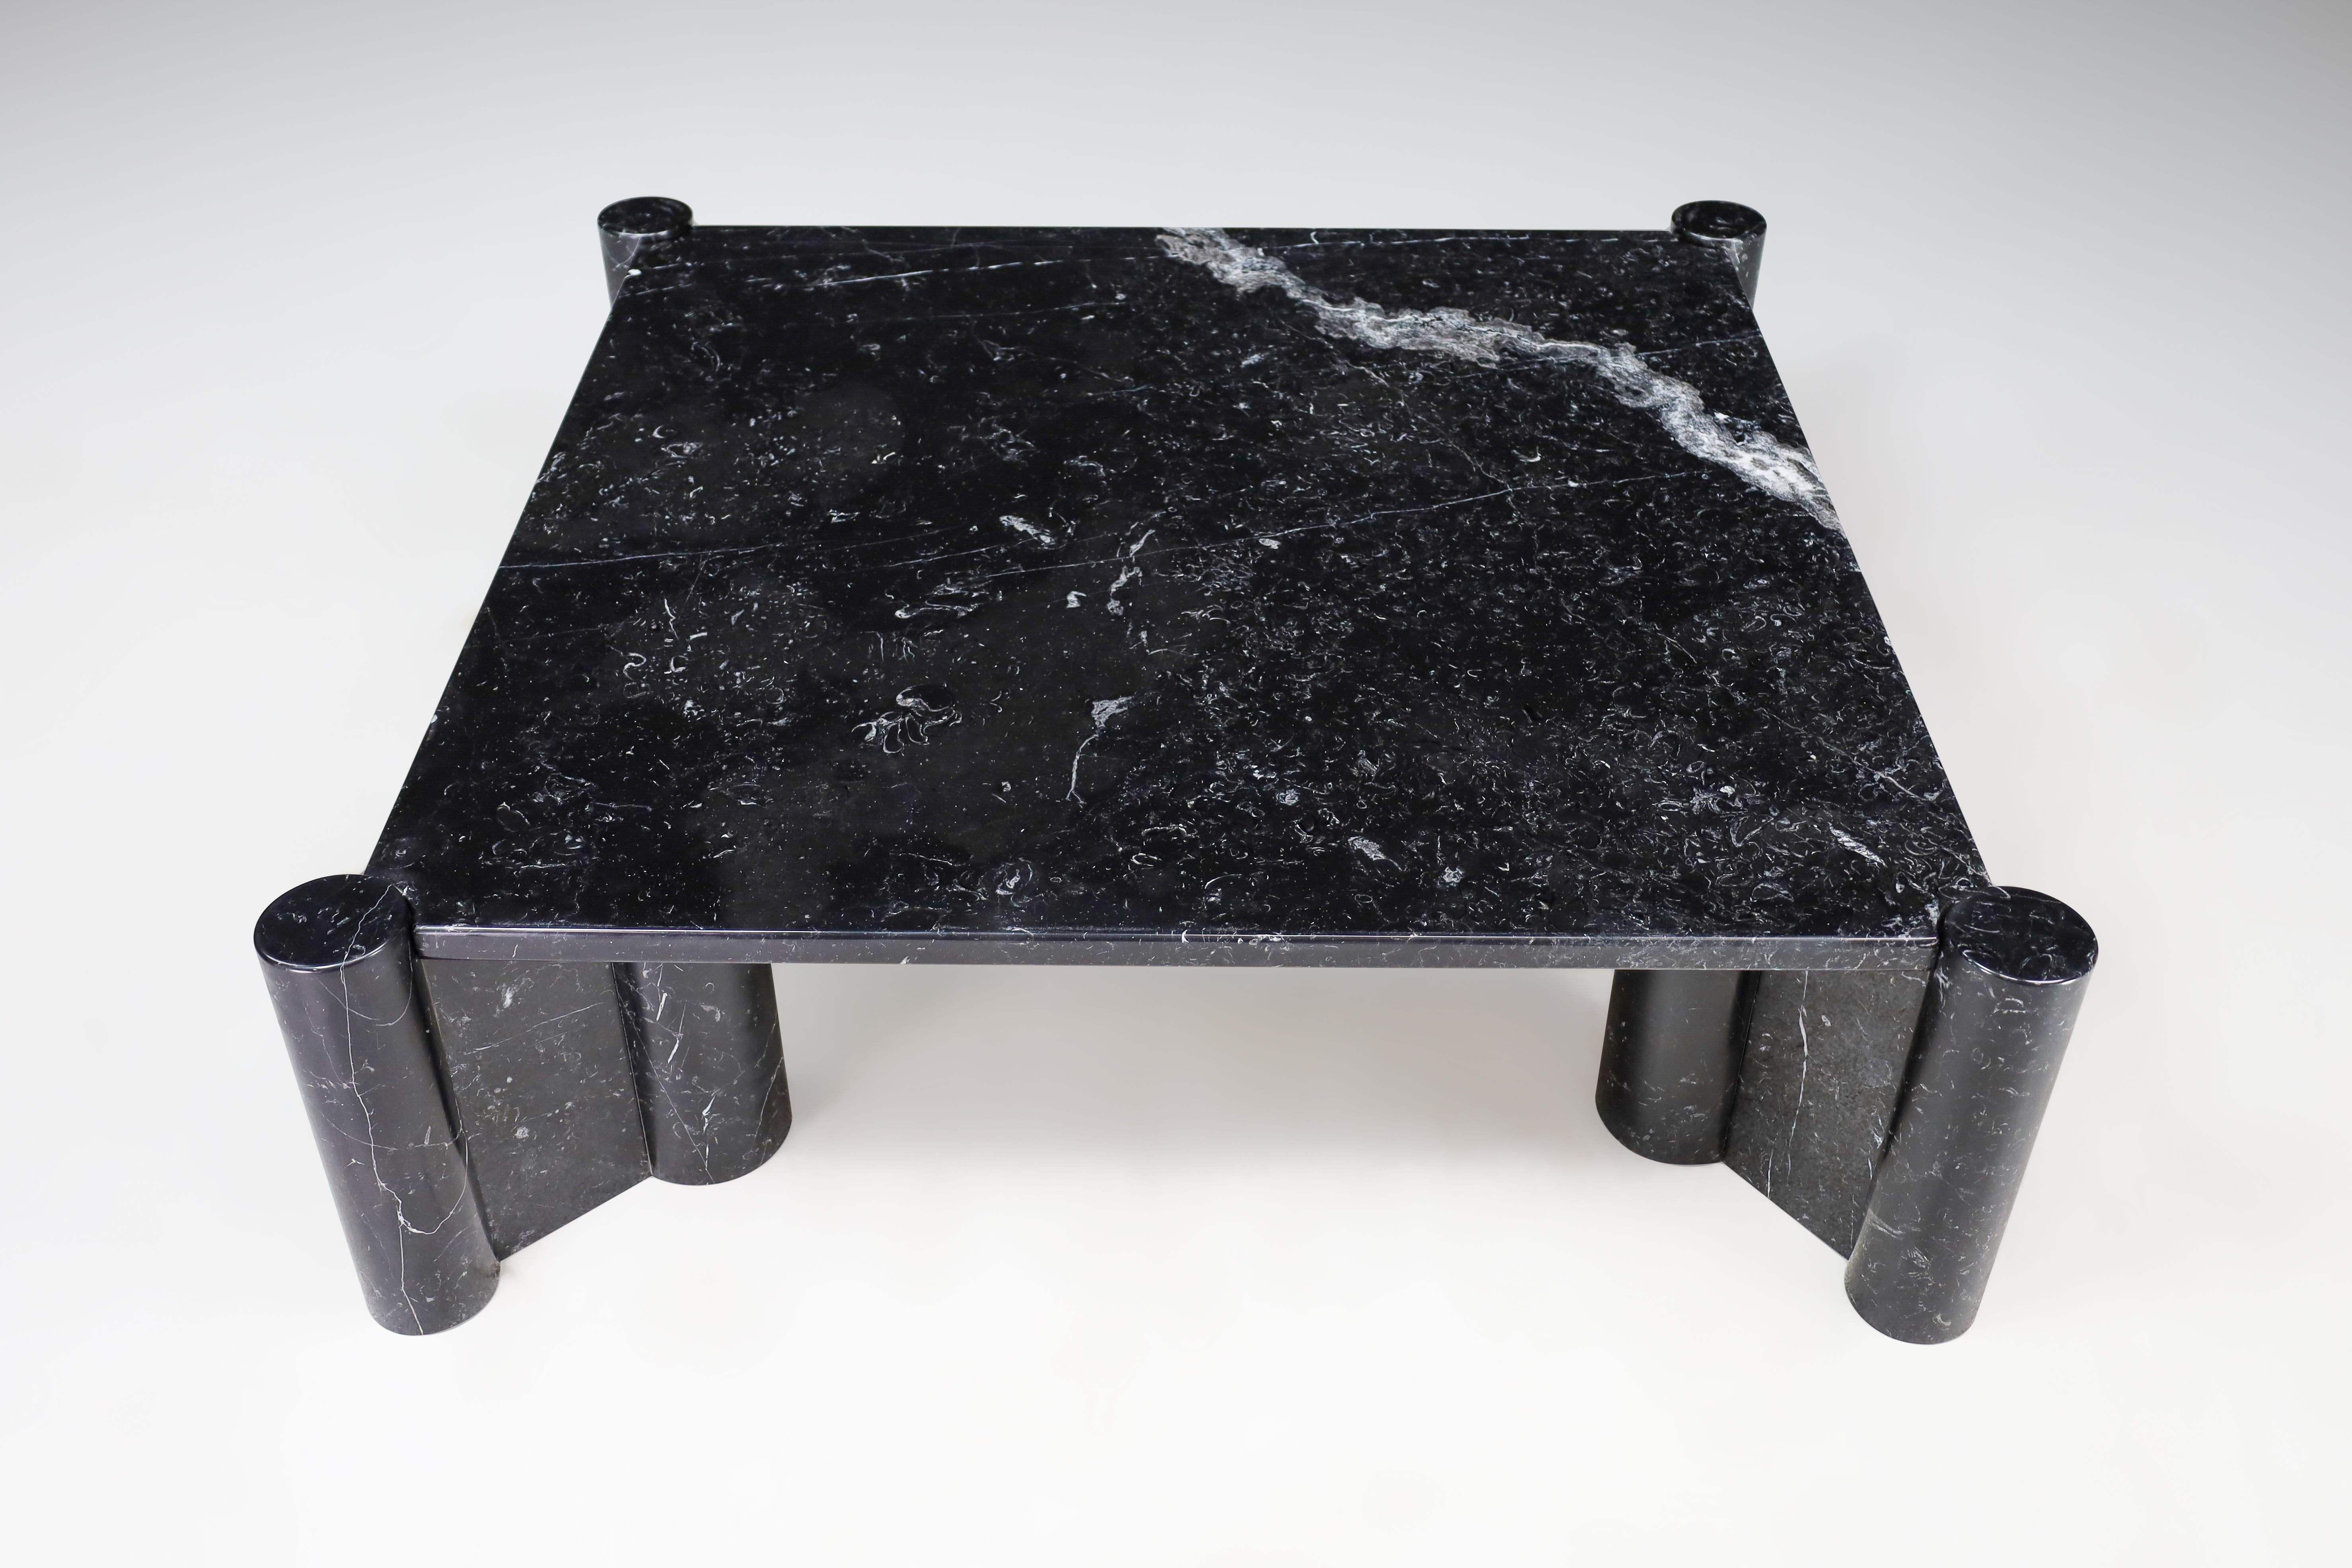 Gae Aulenti Jumbo Coffee Table for Knoll in Black Marquina Marble, Italy 1970s

This coffee table is a stunning piece of furniture made from beautiful black Marquina marble, designed by Gae Aulenti in 1965 for Knoll. The table top is square and sits